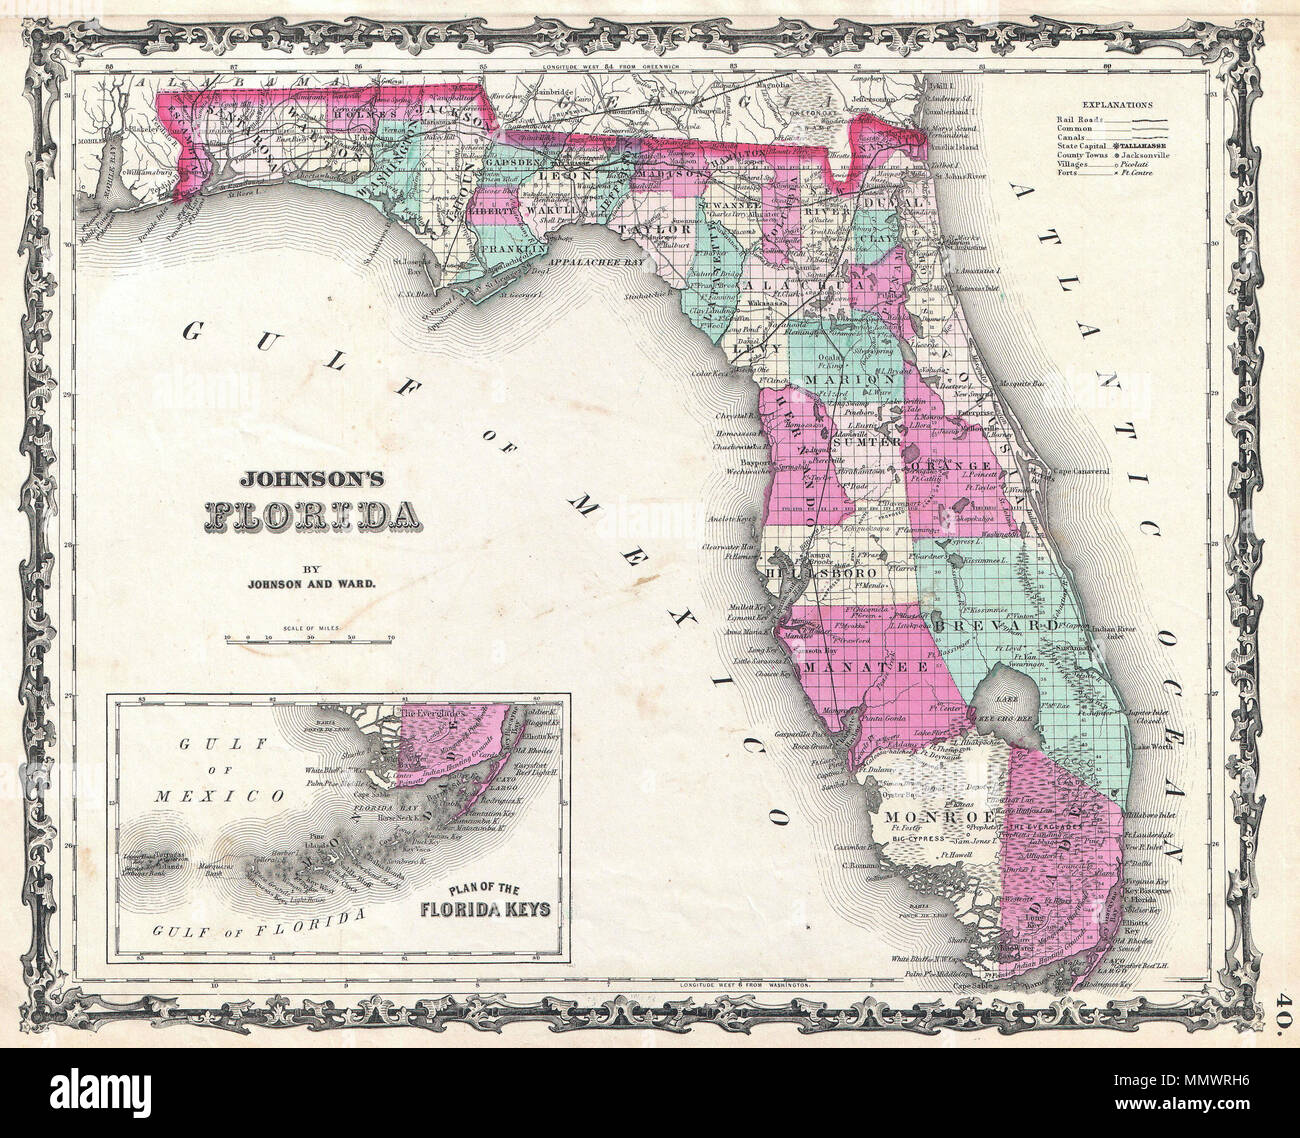 .  English: A beautiful example of A. J. Johnson’s 1862 map of Florida. This rare map offers a fascinating snapshot of this secessionist state shortly following the outbreak of the American Civil War. Map shows the state in full with color coding according to county. Cartographically this map is probably based on U.S. Land Survey charts commissioned in the mid 1850s. Makes numerous references to American Indian tribes and to forts and battles sites related to the Seminole Wars. Notes Lake Okeechobee, the Everglades, the Indian Hunting Grounds, Biscayne Bay, Tampa Bay and the Okefenokee Swamp.  Stock Photo